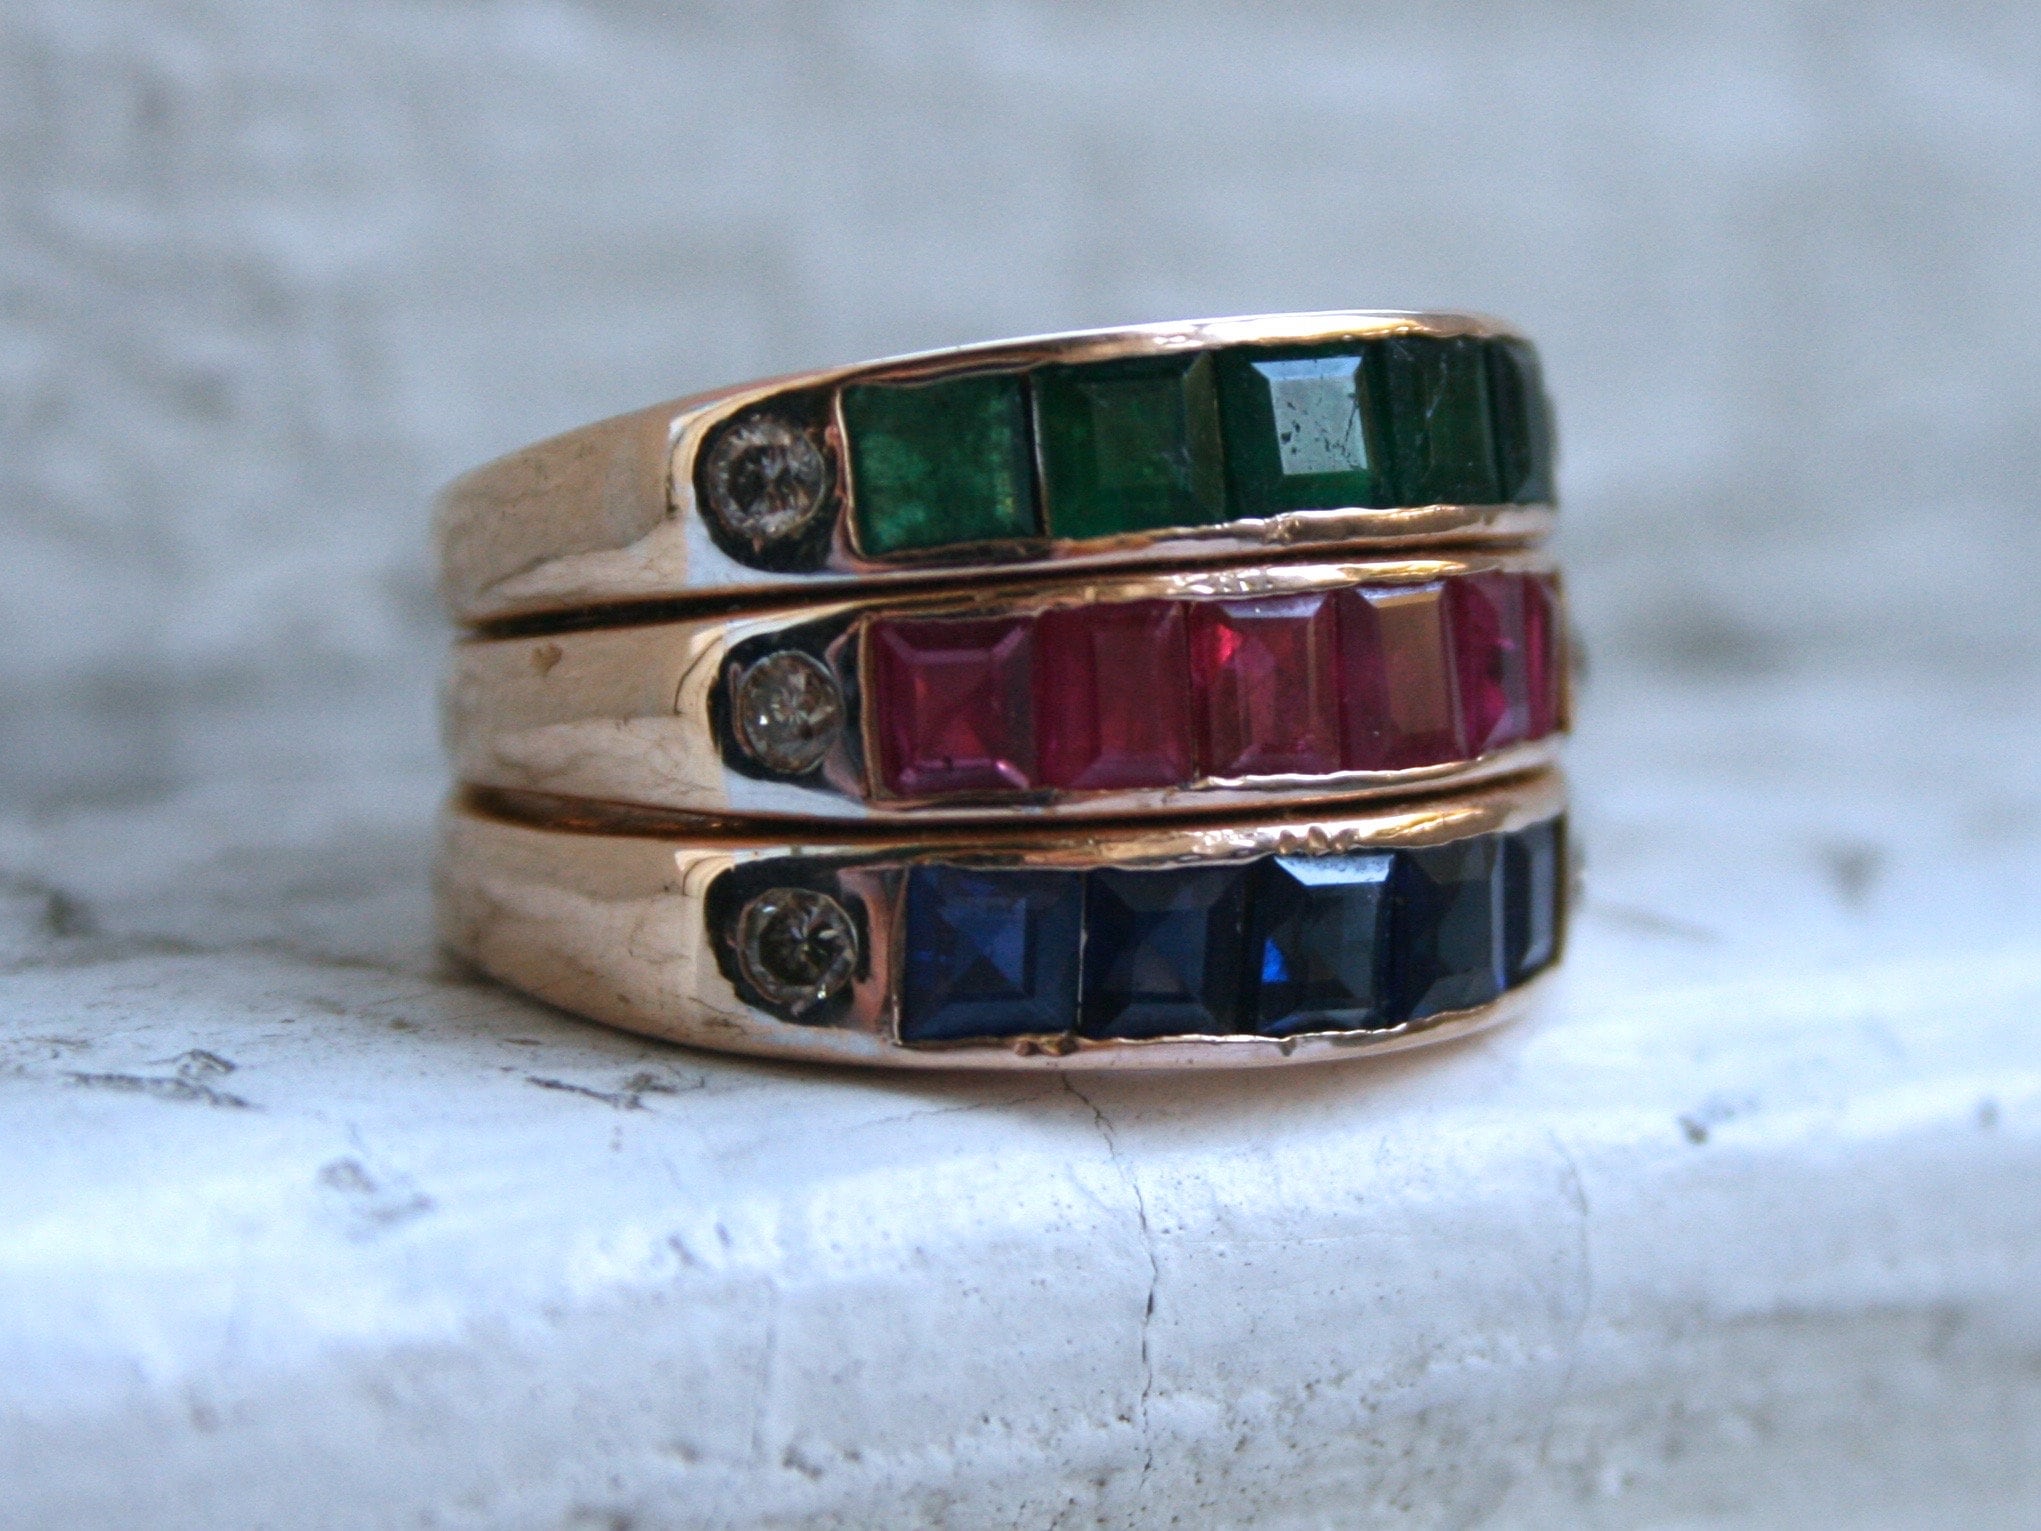 Vintage 14K Yellow Gold Wide Band Ring with Rubies, Emeralds, Diamonds, Sapphires, and Diamonds.